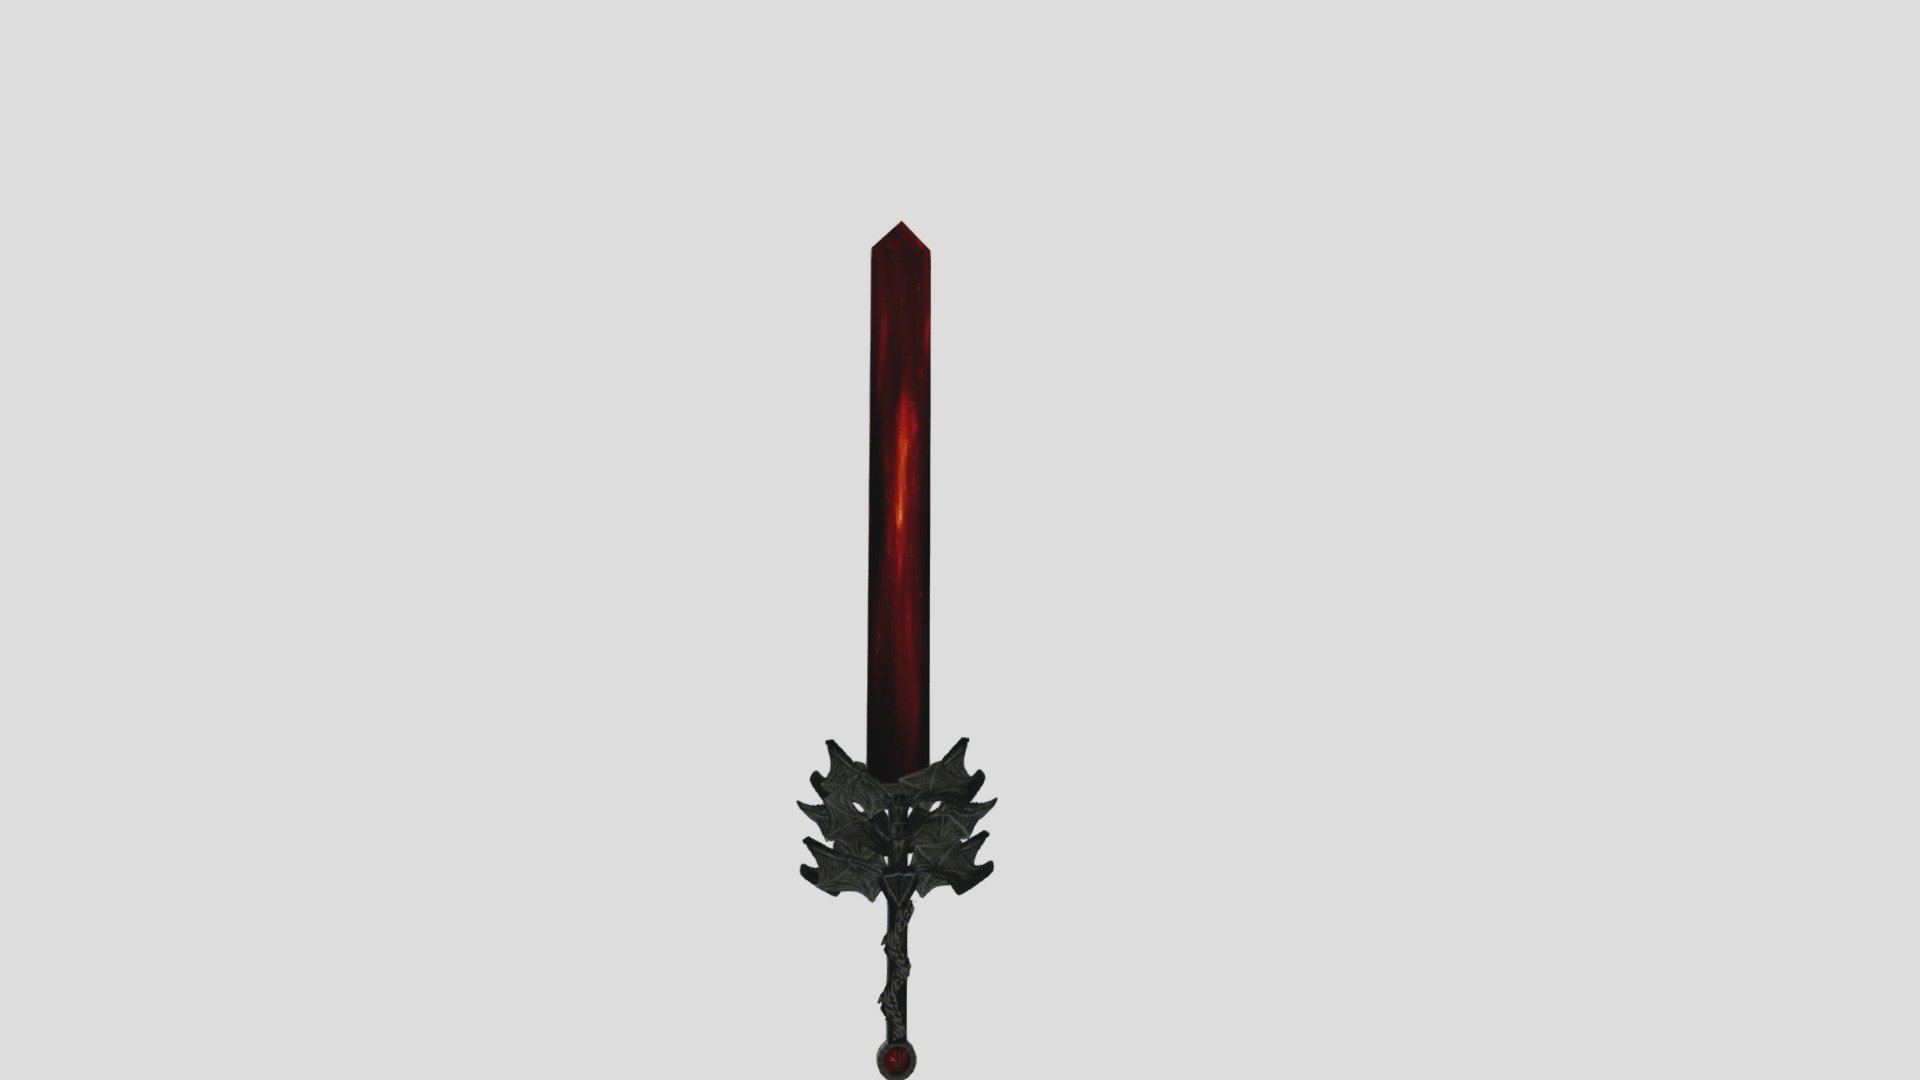 sword from Guild Wars 2

textures are taken from this mod (except for the skull and pommel): https://www.nexusmods.com/skyrim/mods/56031?tab=files&amp;file_id=1000117823 - Twilight sword - 3D model by IIOKEP 3d model